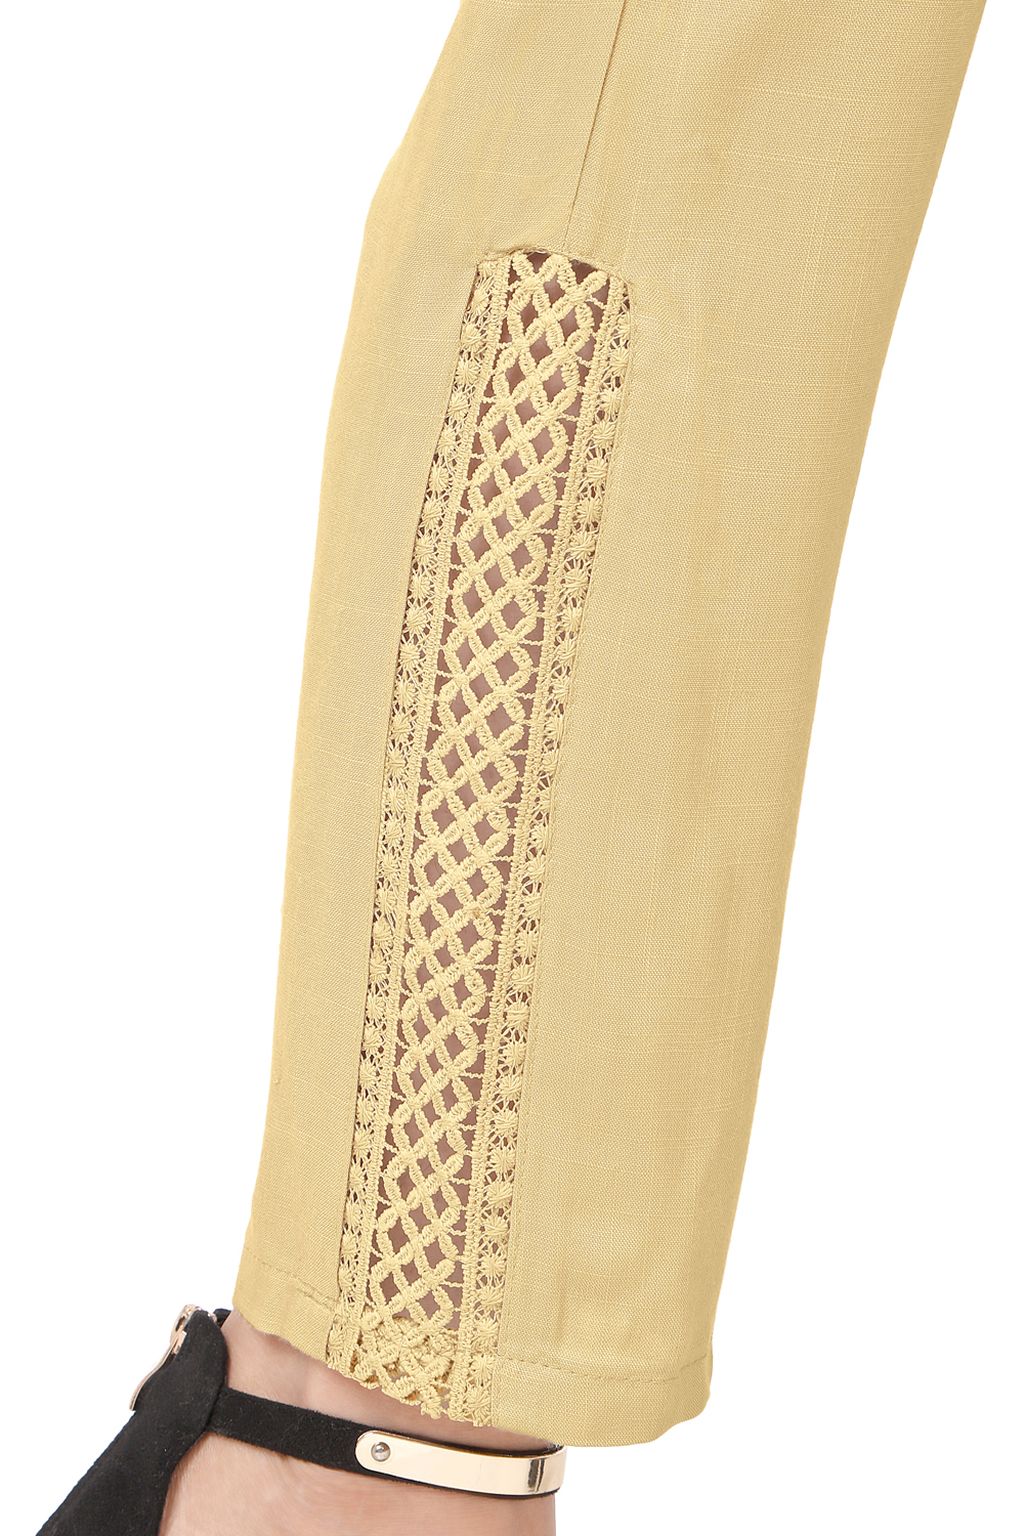 Inaaya Fashion - Cotton cigarette pants with lace bottom | Facebook